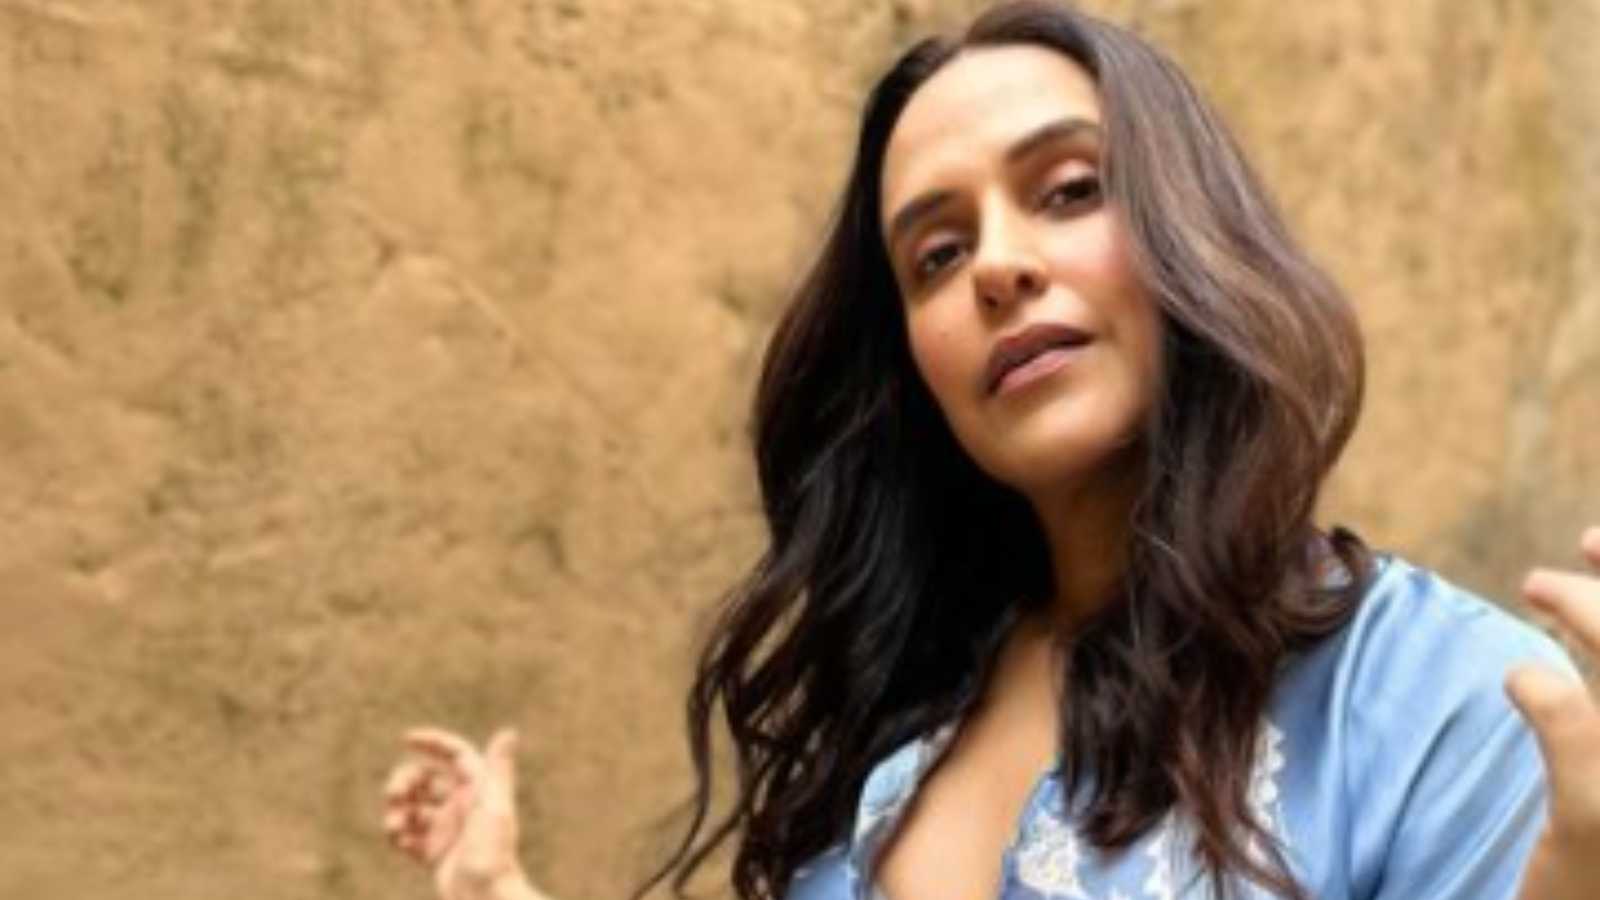 'Going naked has nothing to do with guts' : Neha Dhupia trolled for going semi-nude in her latest photoshoot